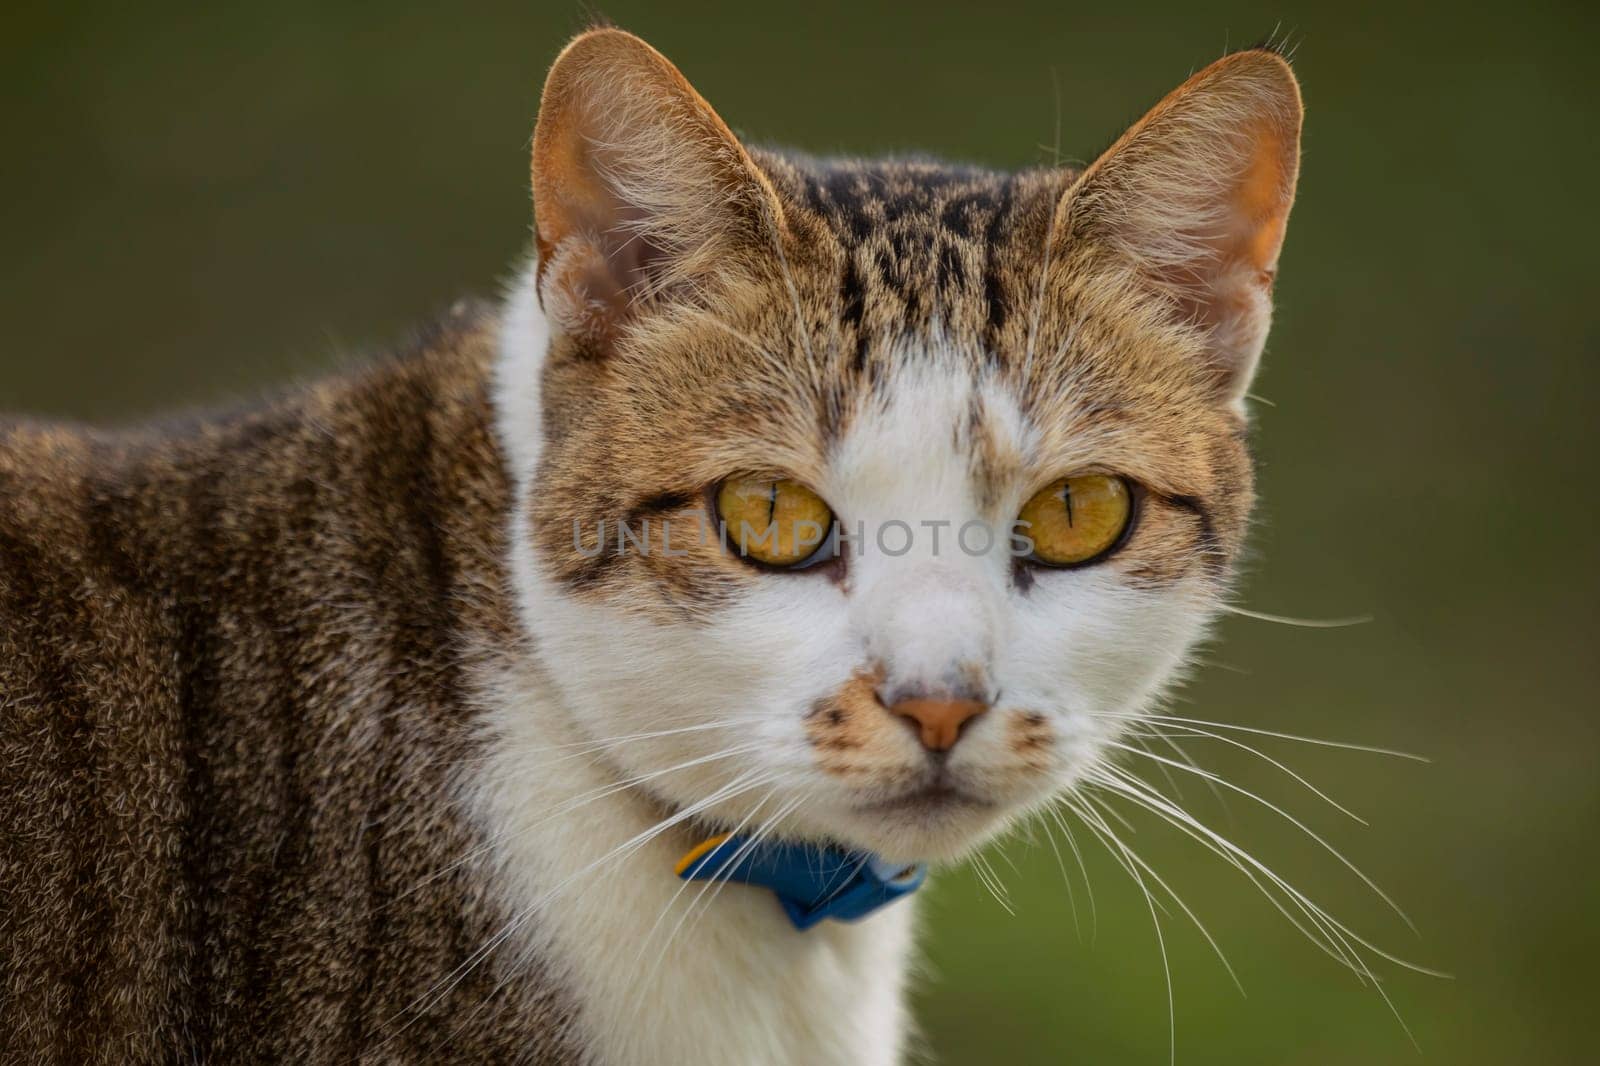 close-up portrait of a cat by zokov